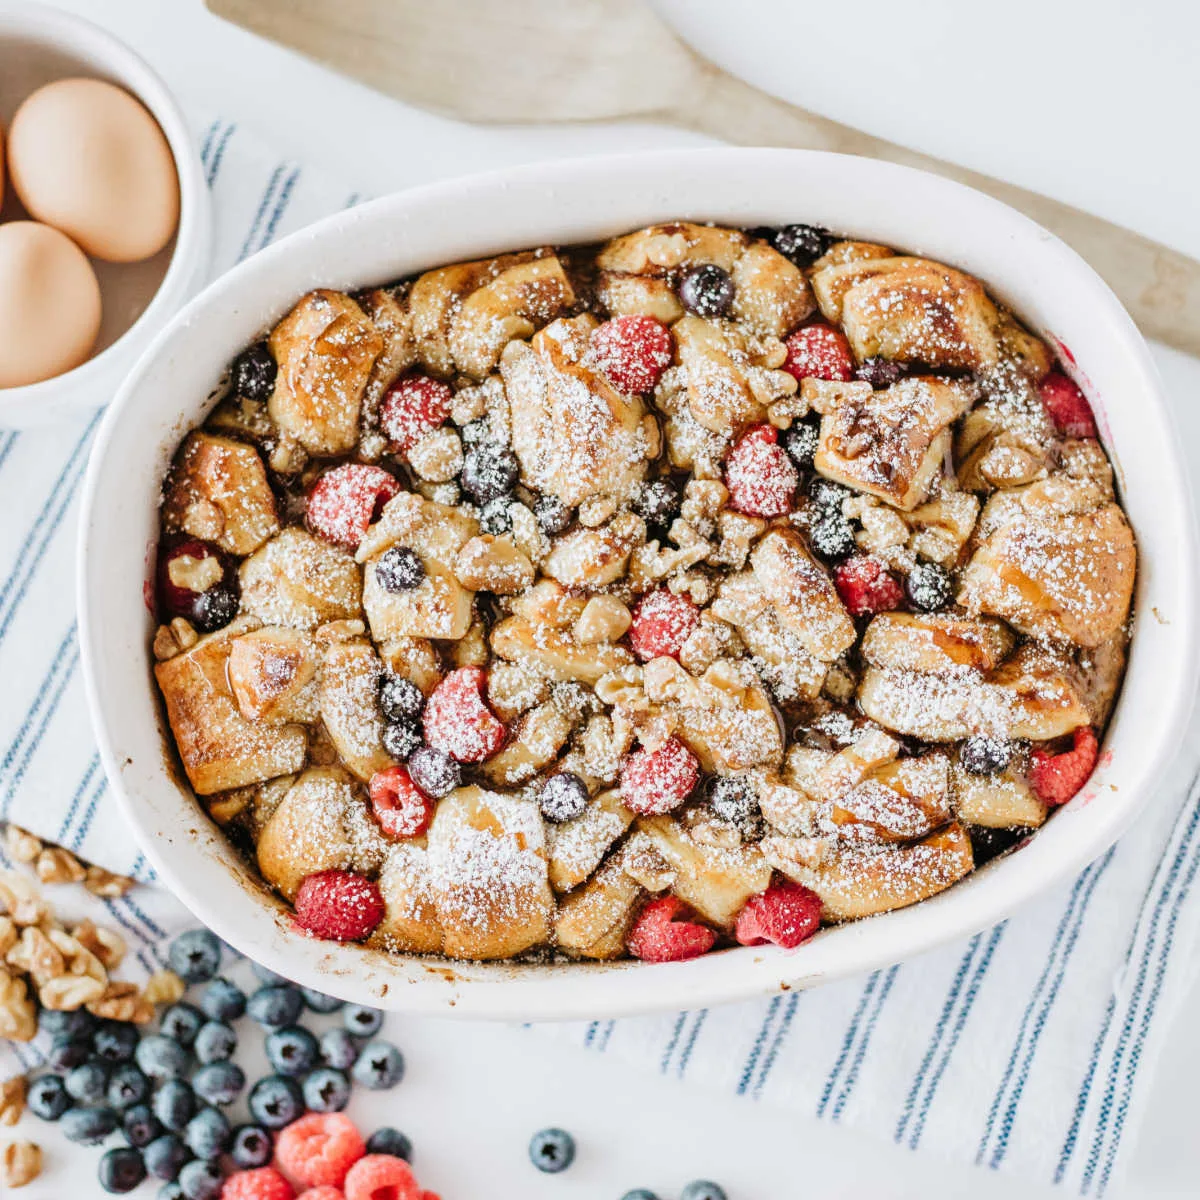 Casserole dish filled with cinnamon roll and berry french toast bake, ready to be served.